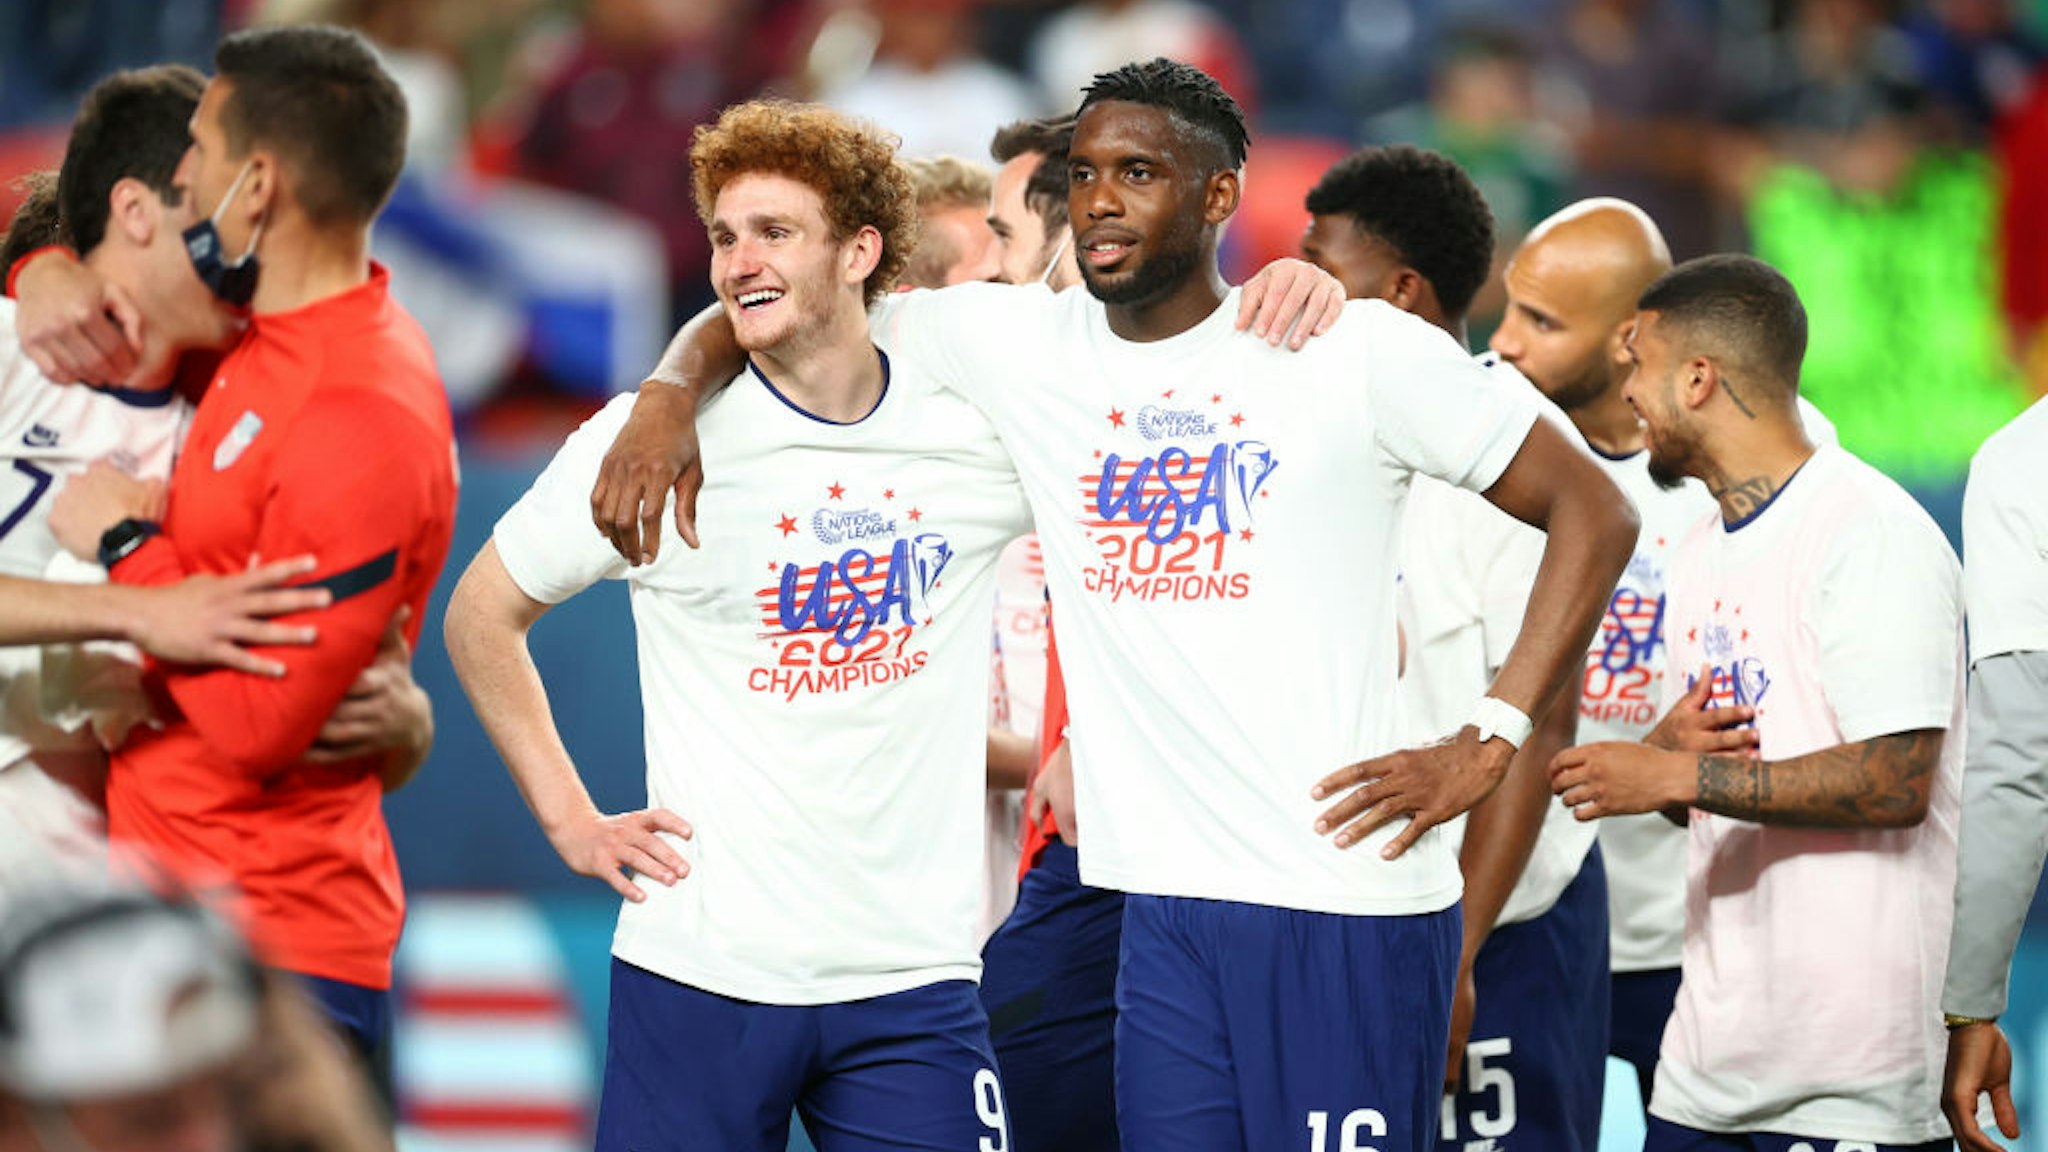 DENVER, CO - JUNE 6: Josh Sargent #9 and Jordan Siebatcheu #16 of the United States celebrate their win over Mexico in the Nations League Final during a game between Mexico and USMNT at Empower Field at Mile High on June 6, 2021 in Denver, Colorado. (Photo by Jamie Schwaberow/ISI Photos/Getty Images)